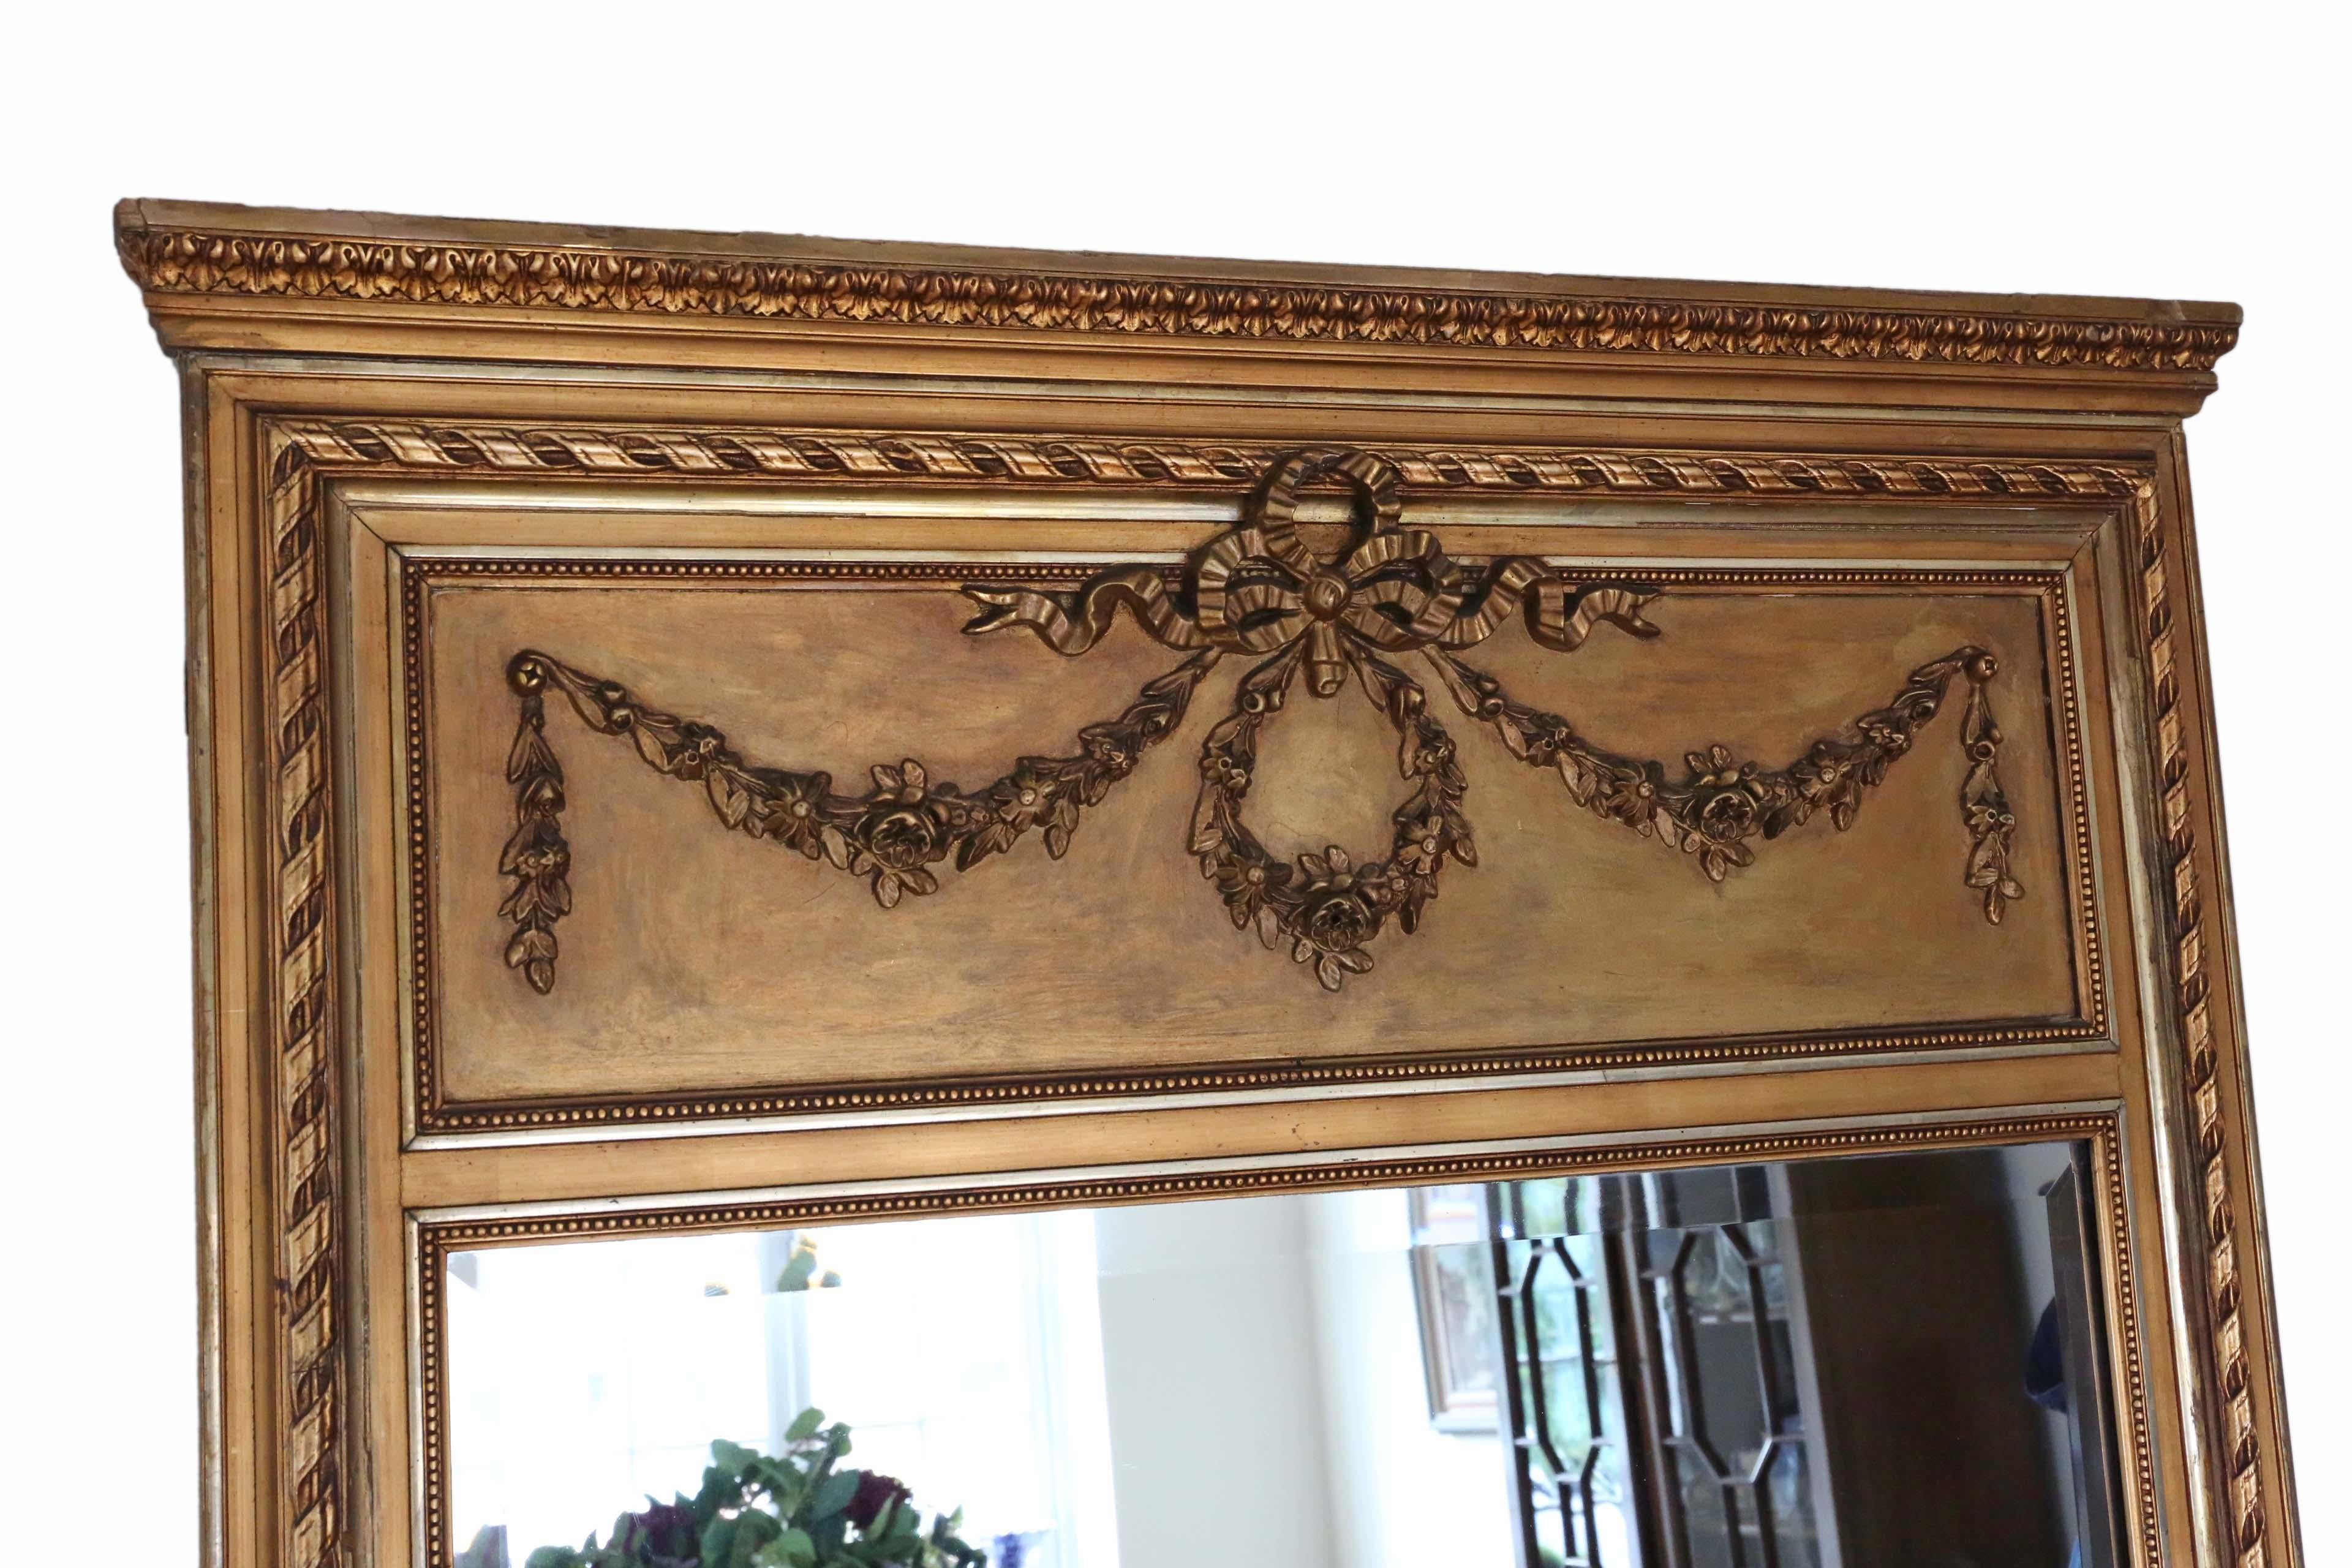 Antique very large fine quality 19th century gilt full height wall mirror. A large statement piece.

A charming mirror, that is full of age and character. The frame has it's original finish and gilding, with wear and patina. Also, minor losses